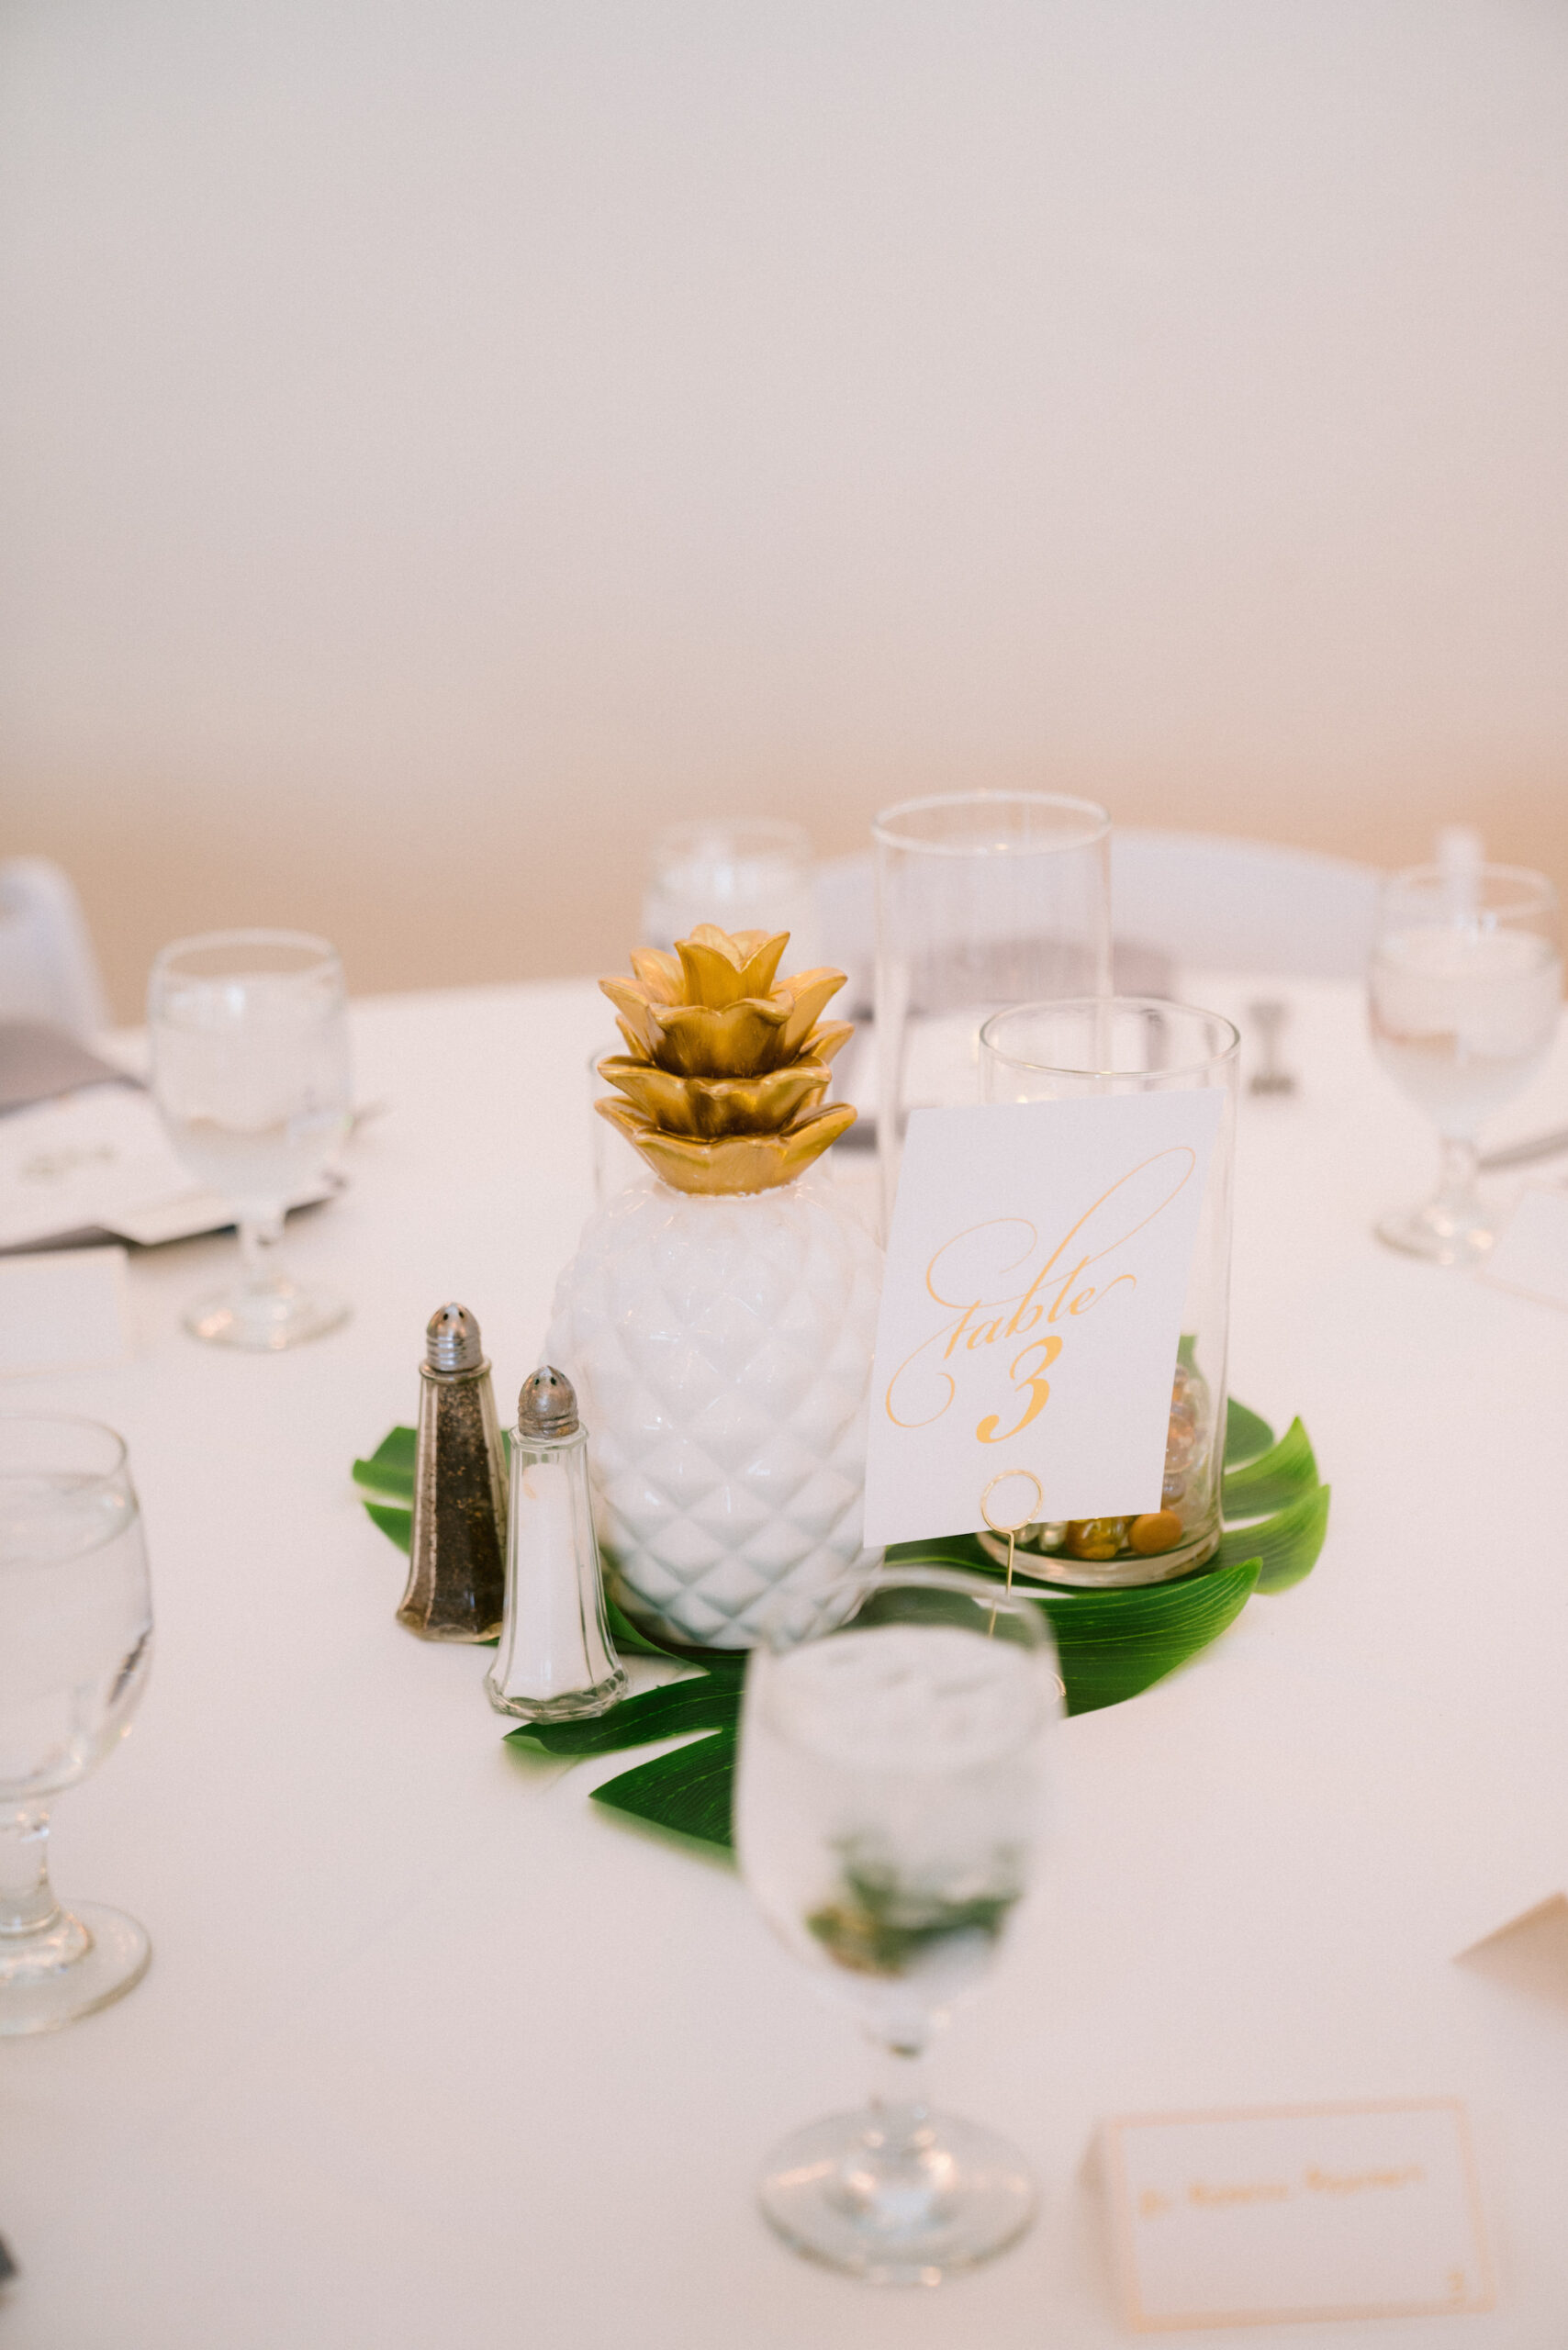 White Chairs and White Linen Table with Gray Napkins and Runner | Monstera Leaf and Tropical Pineapple Centerpiece